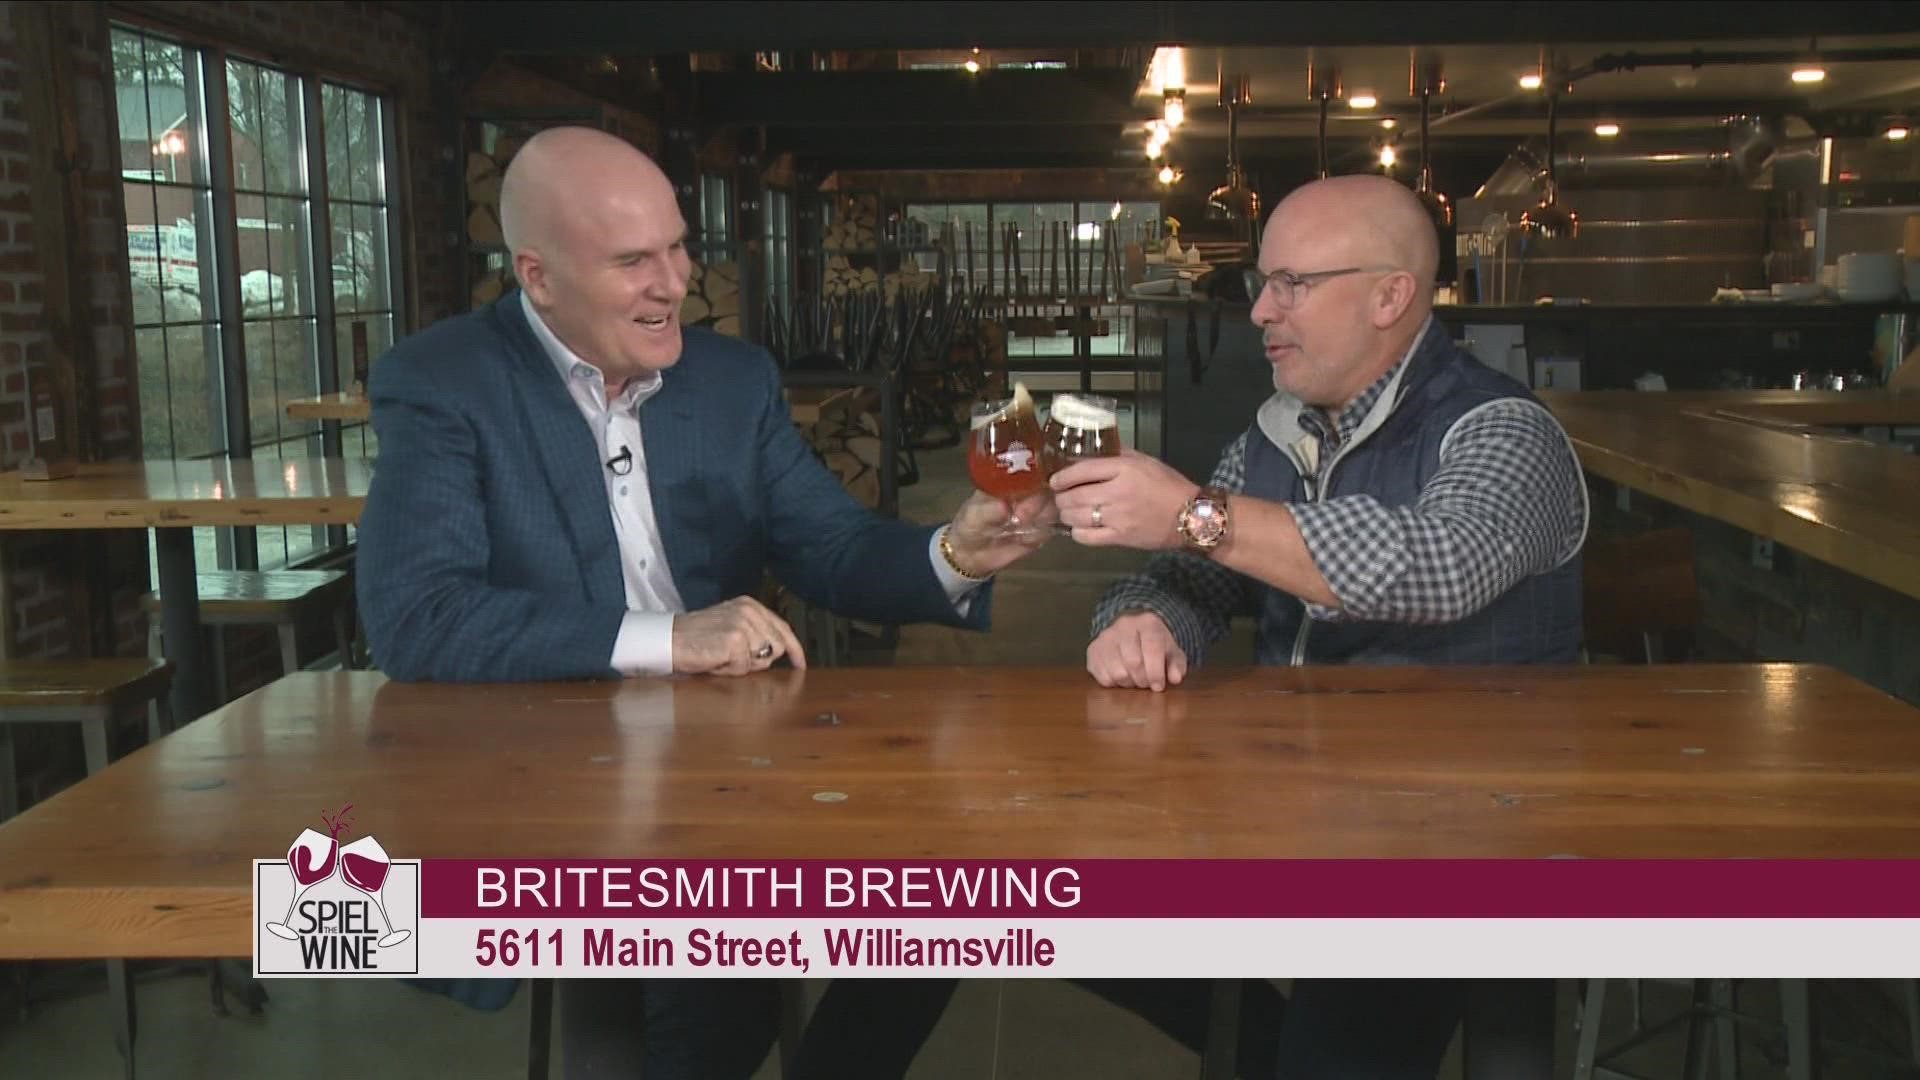 Spiel the Wine -- January 22 -- Segment 3 THIS VIDEO IS SPONSORED BY BRITESMITH BREWING AND RIVER SPRING LODGE